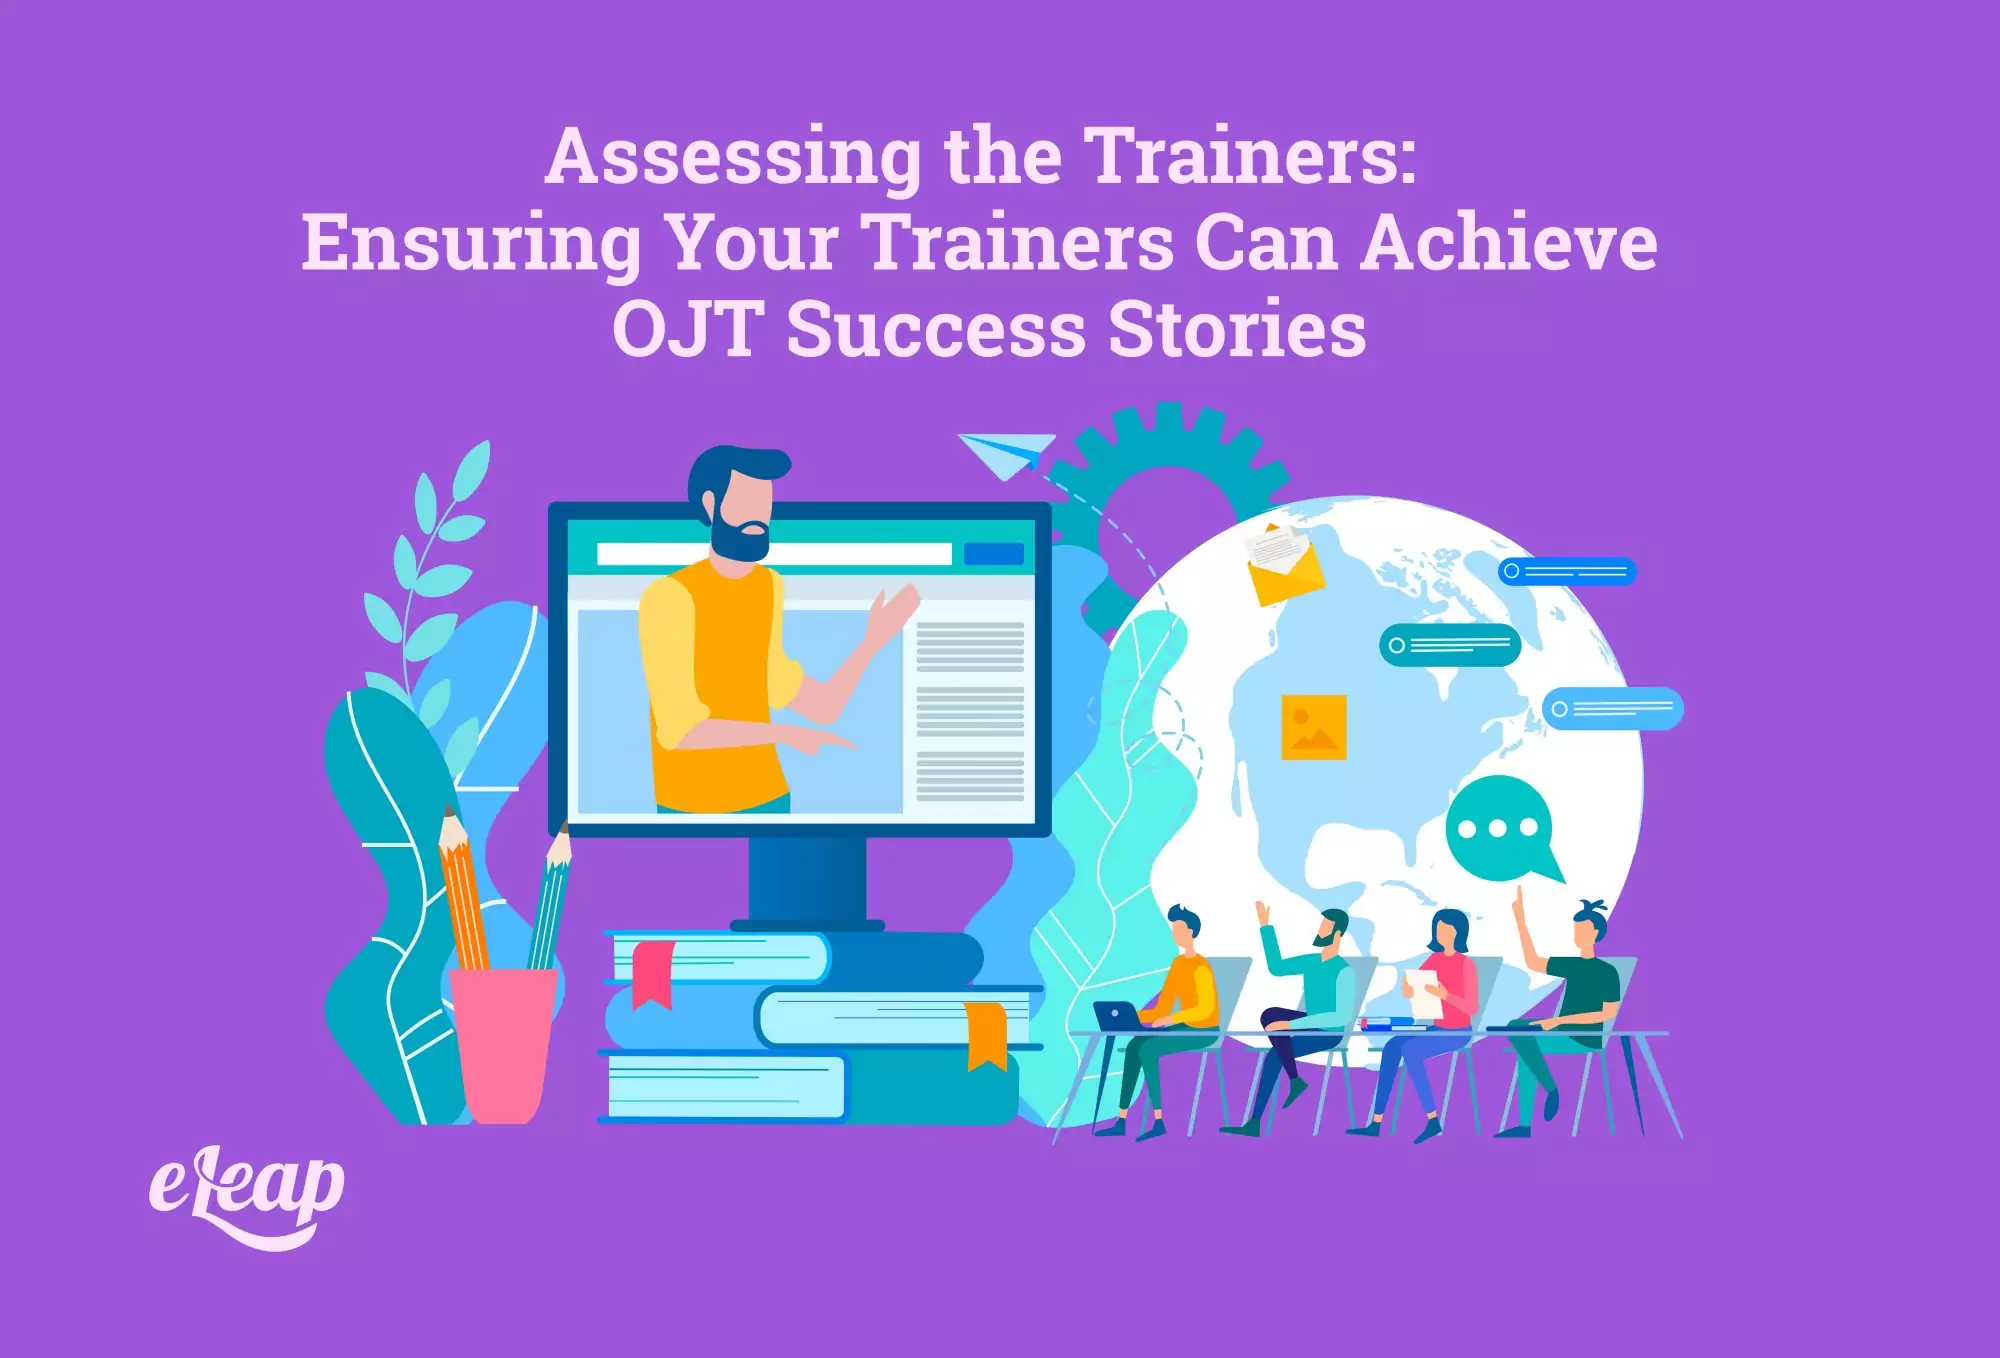 Assessing the Trainers: Ensuring Your Trainers Can Achieve OJT Success Stories